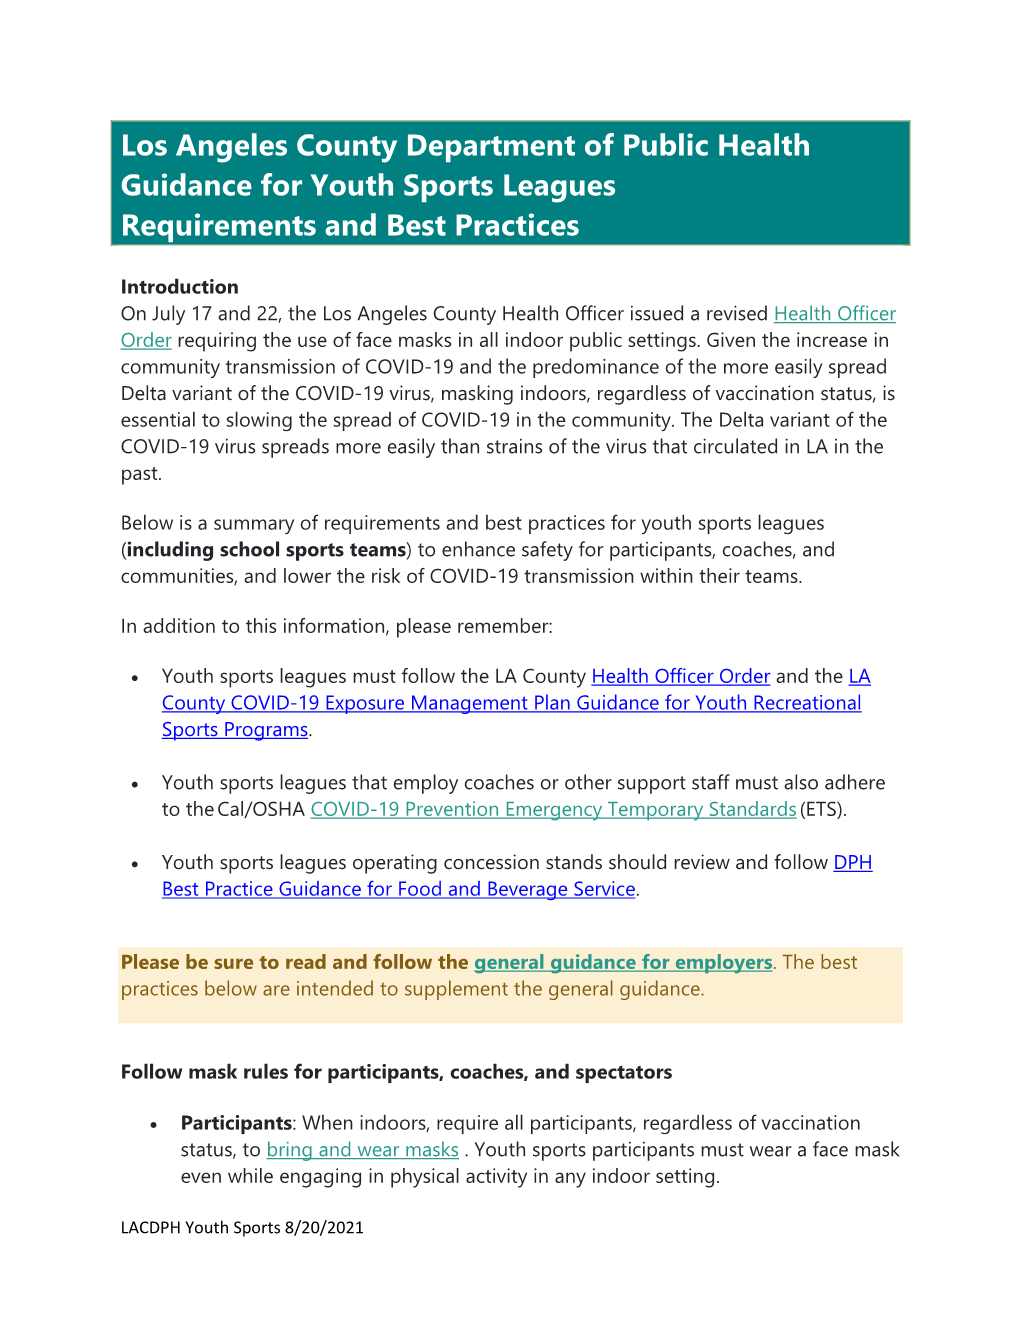 Los Angeles County Department of Public Health Guidance for Youth Sports Leagues Requirements and Best Practices